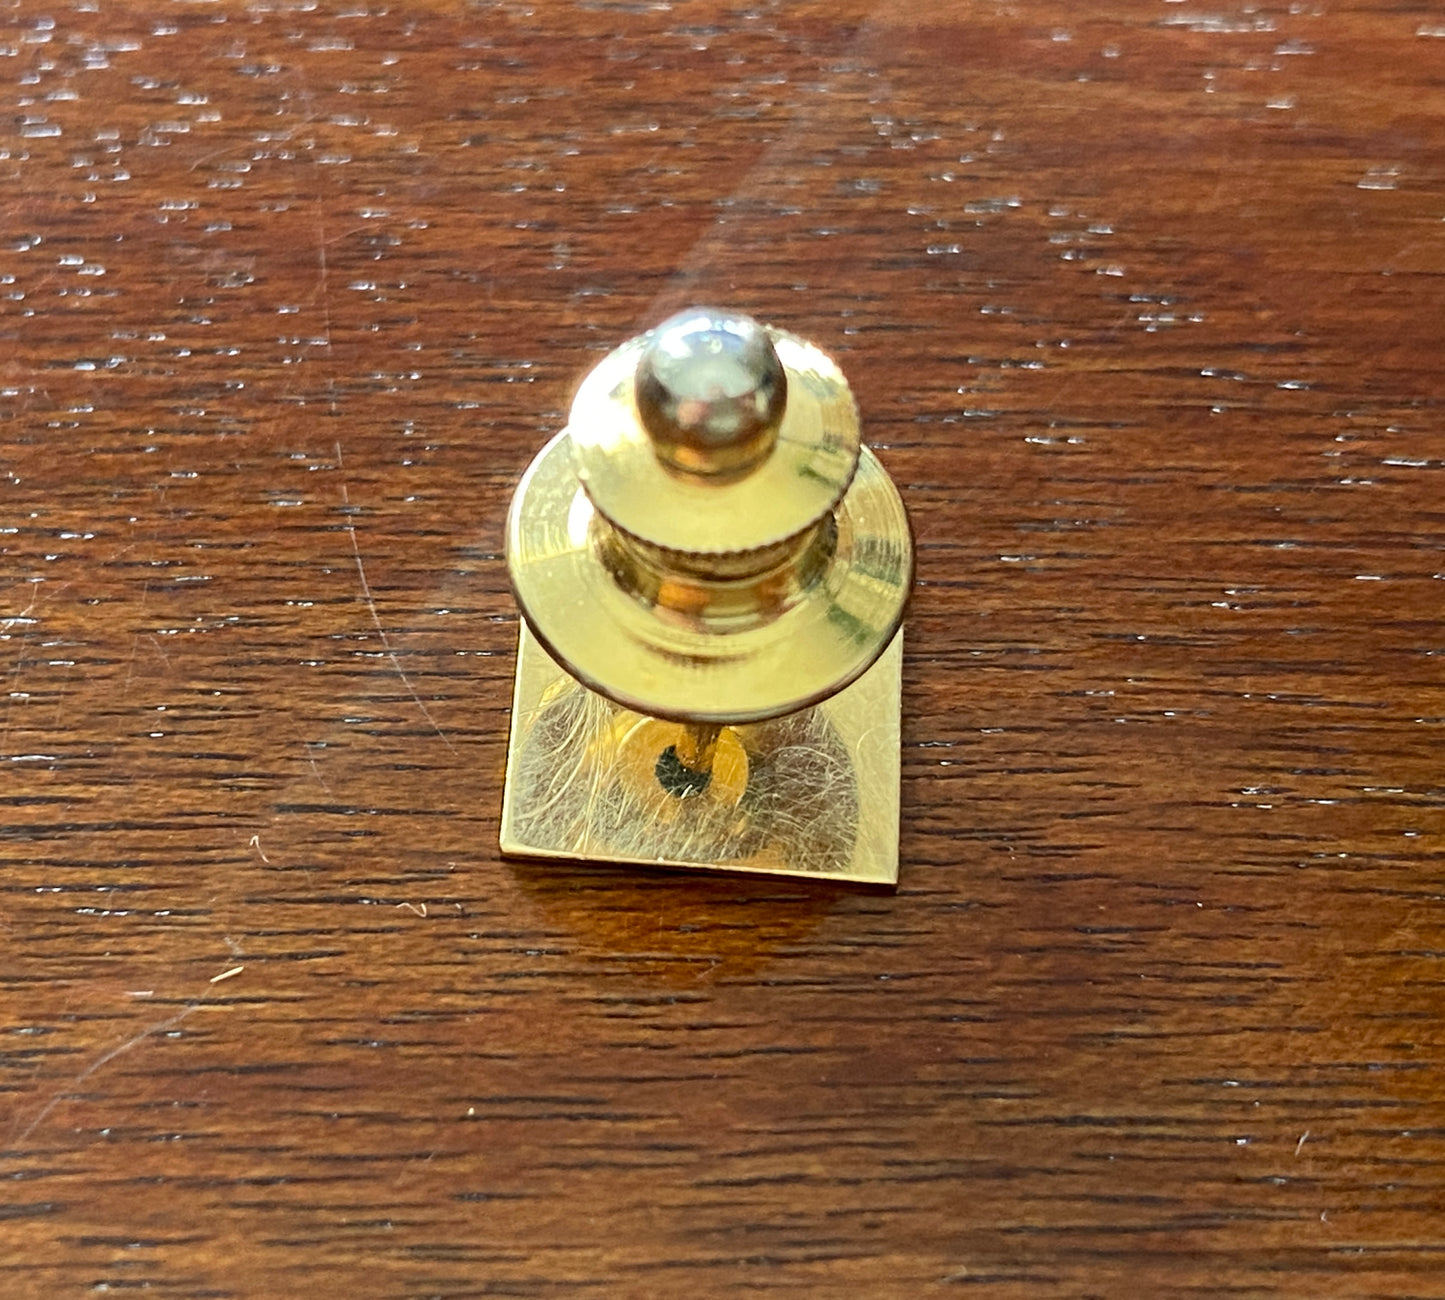 Vintage 14k Yellow Gold Tie Tack Square